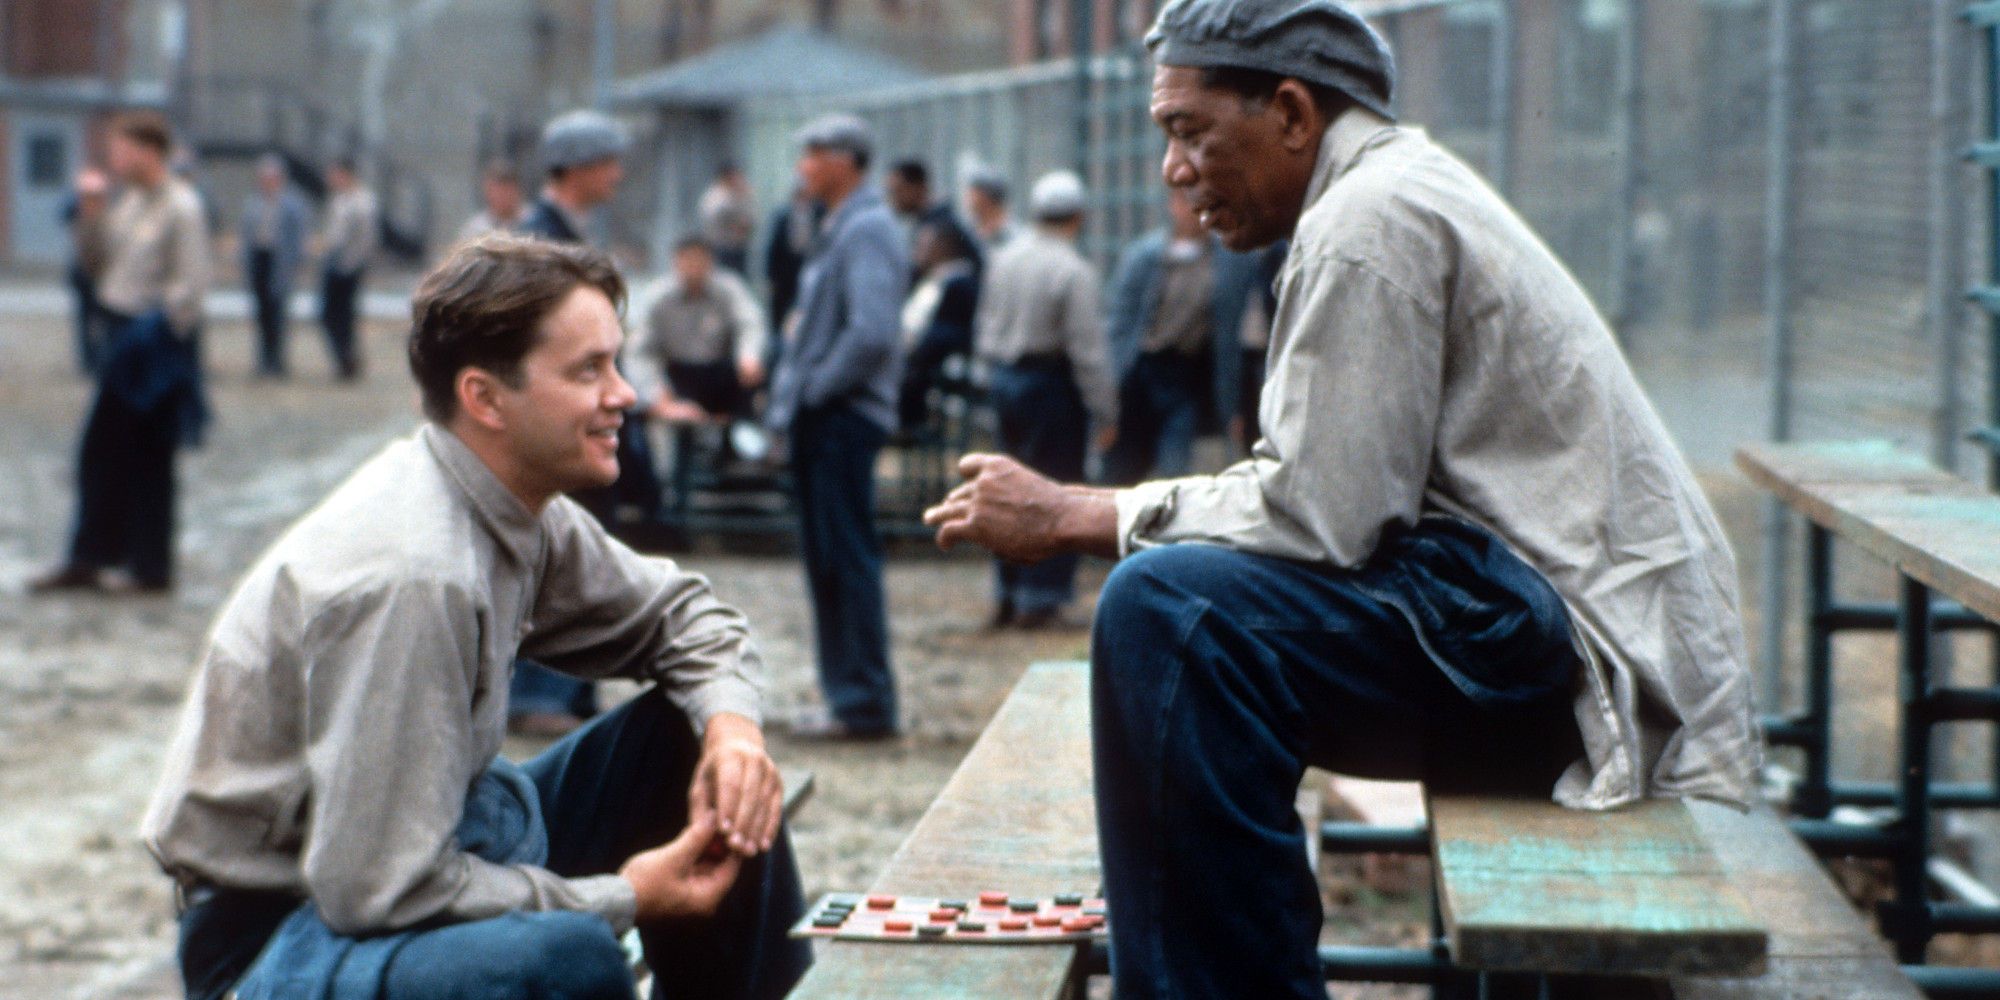 Andy plays checkers with Red in The Shawshank Redemption